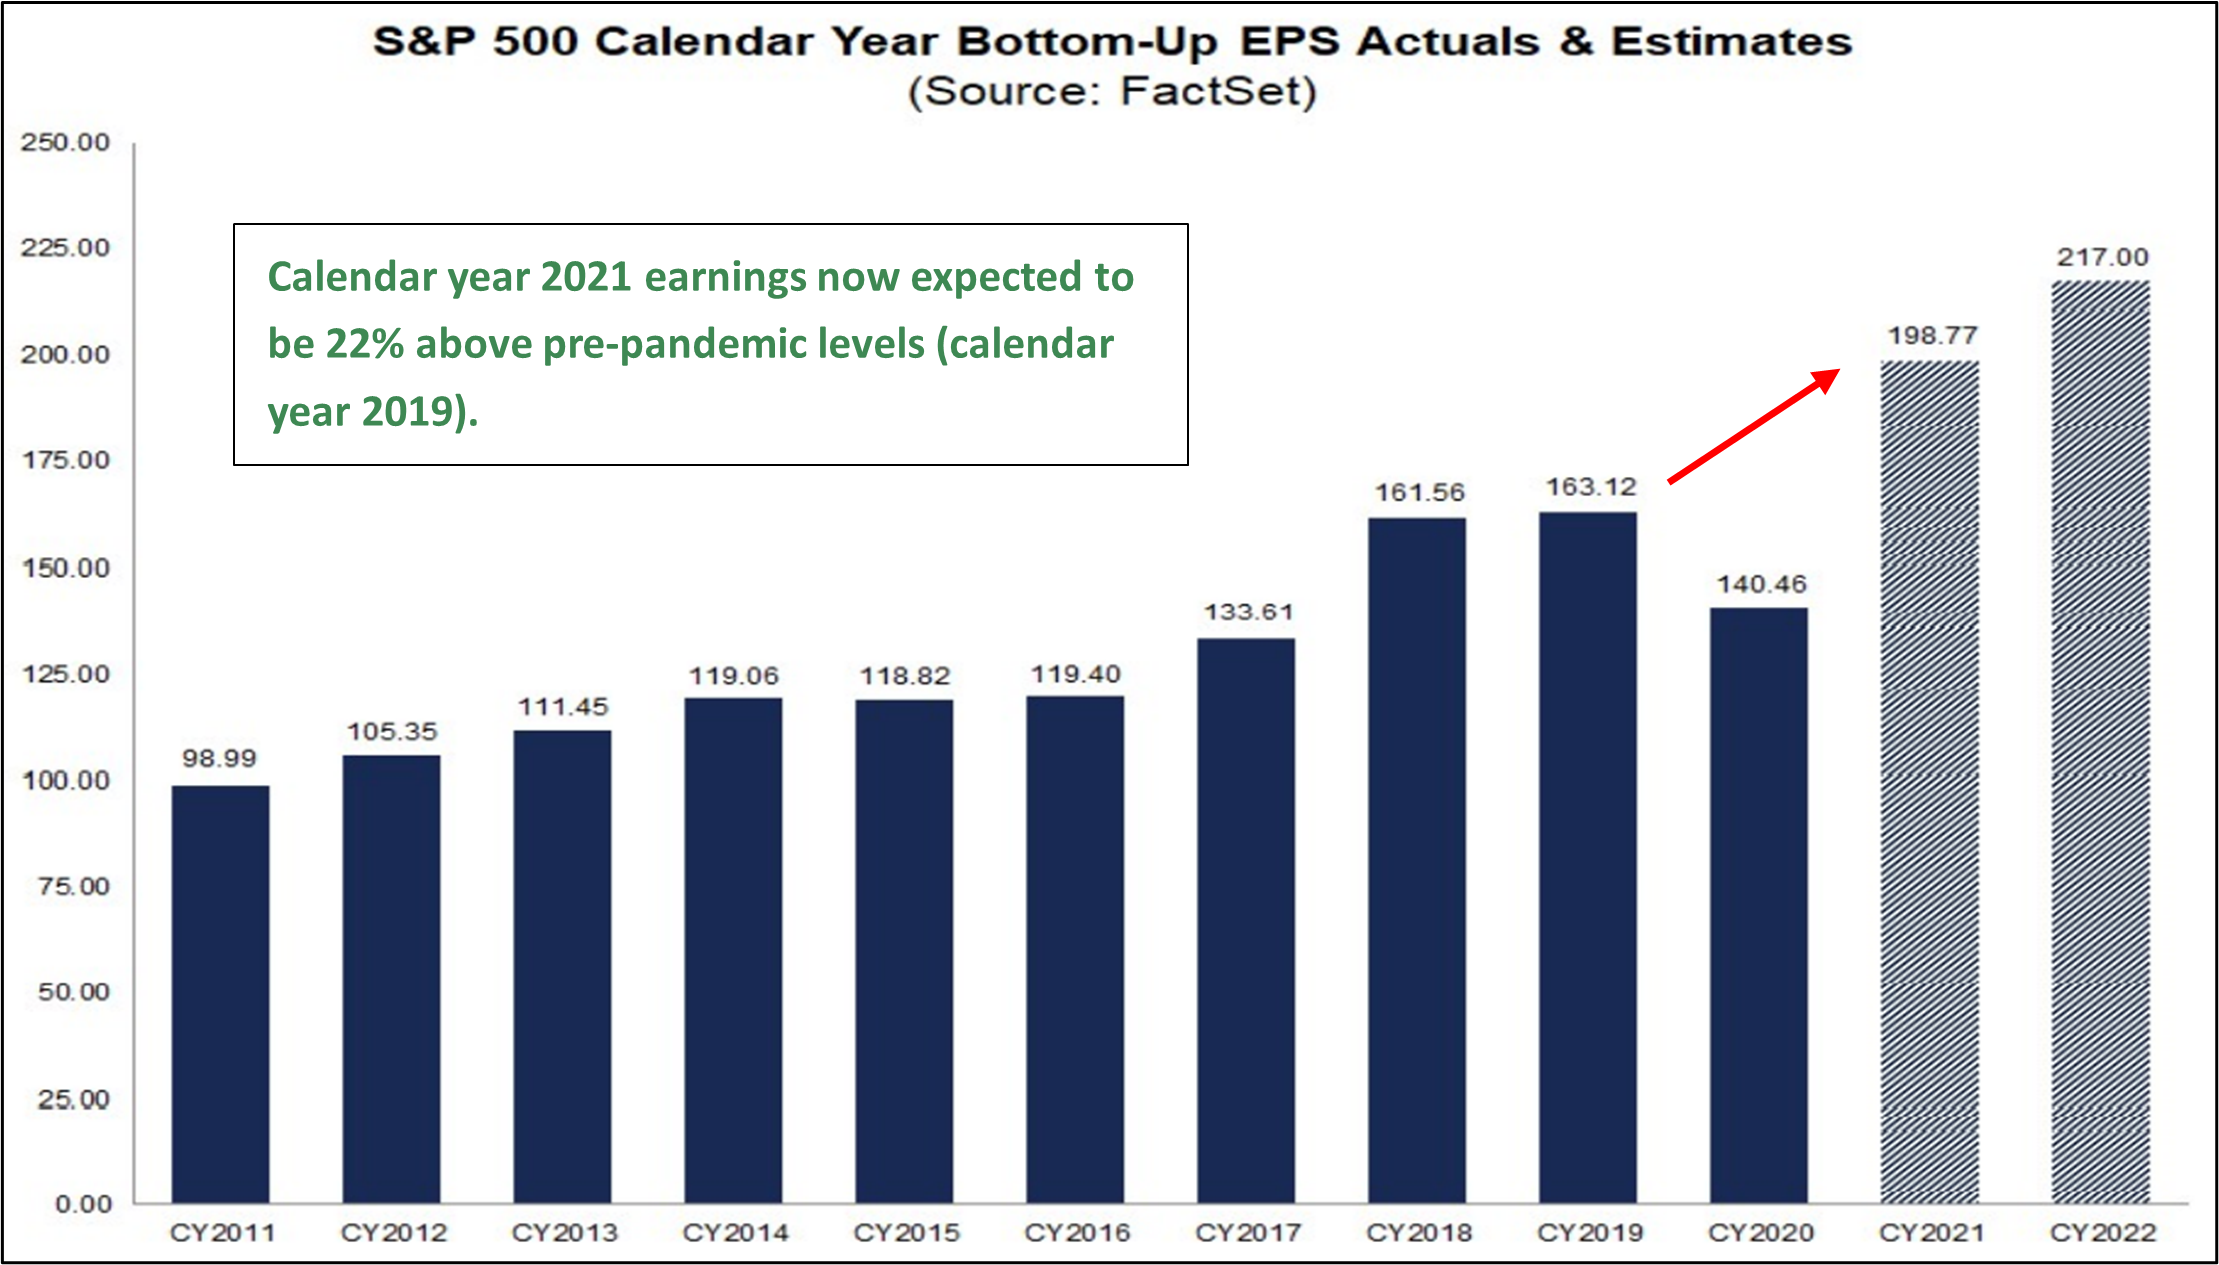 Line graph depicting S&P 500 Calendar Year Bottom-Up EPS Actuals & Estimates from CY 2011 to CY 2022 with note: Calendar year 2021 earnings now expected to be 22% above pre-pandemic levels (calendar year 2019).